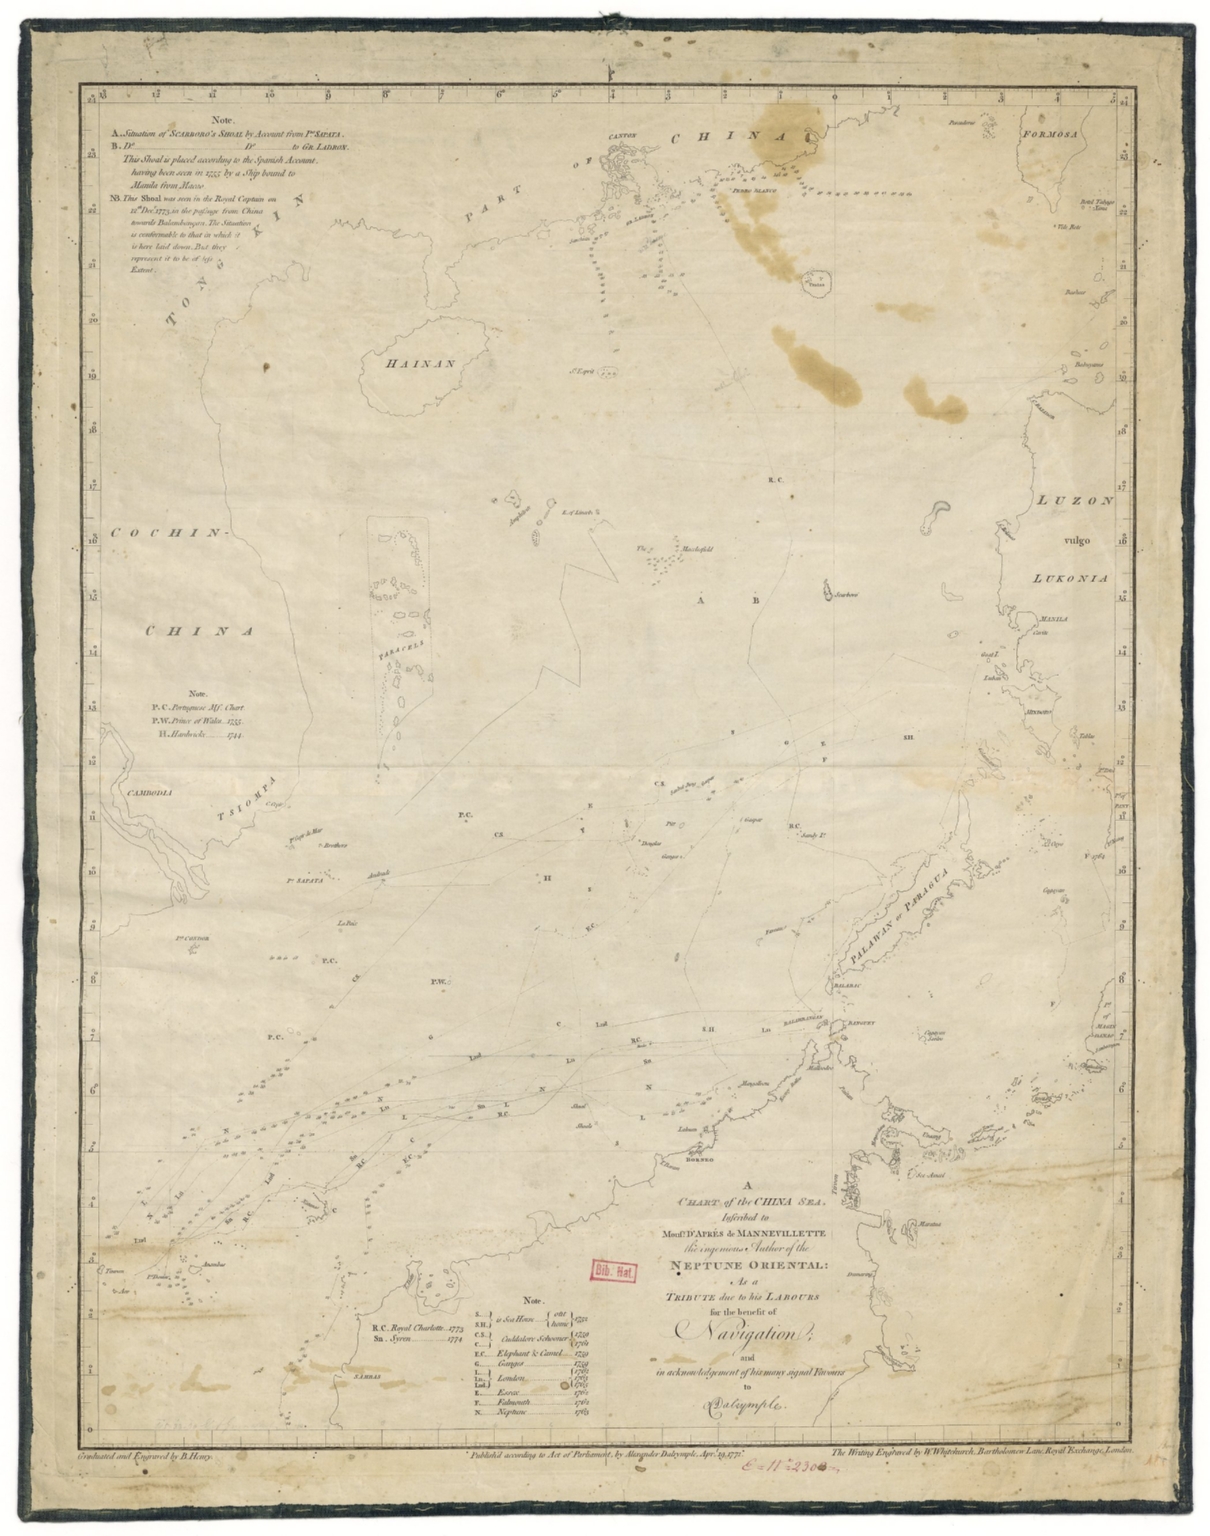 A chart of the China Sea : inscribed to Mons.r d'Aprés de Mannevillette the ingenious author of the Neptune Oriental, as a tribute due to his labours for the benefit of navigation, and in acknowledgment of his many signal favours to A. Dalrymple.